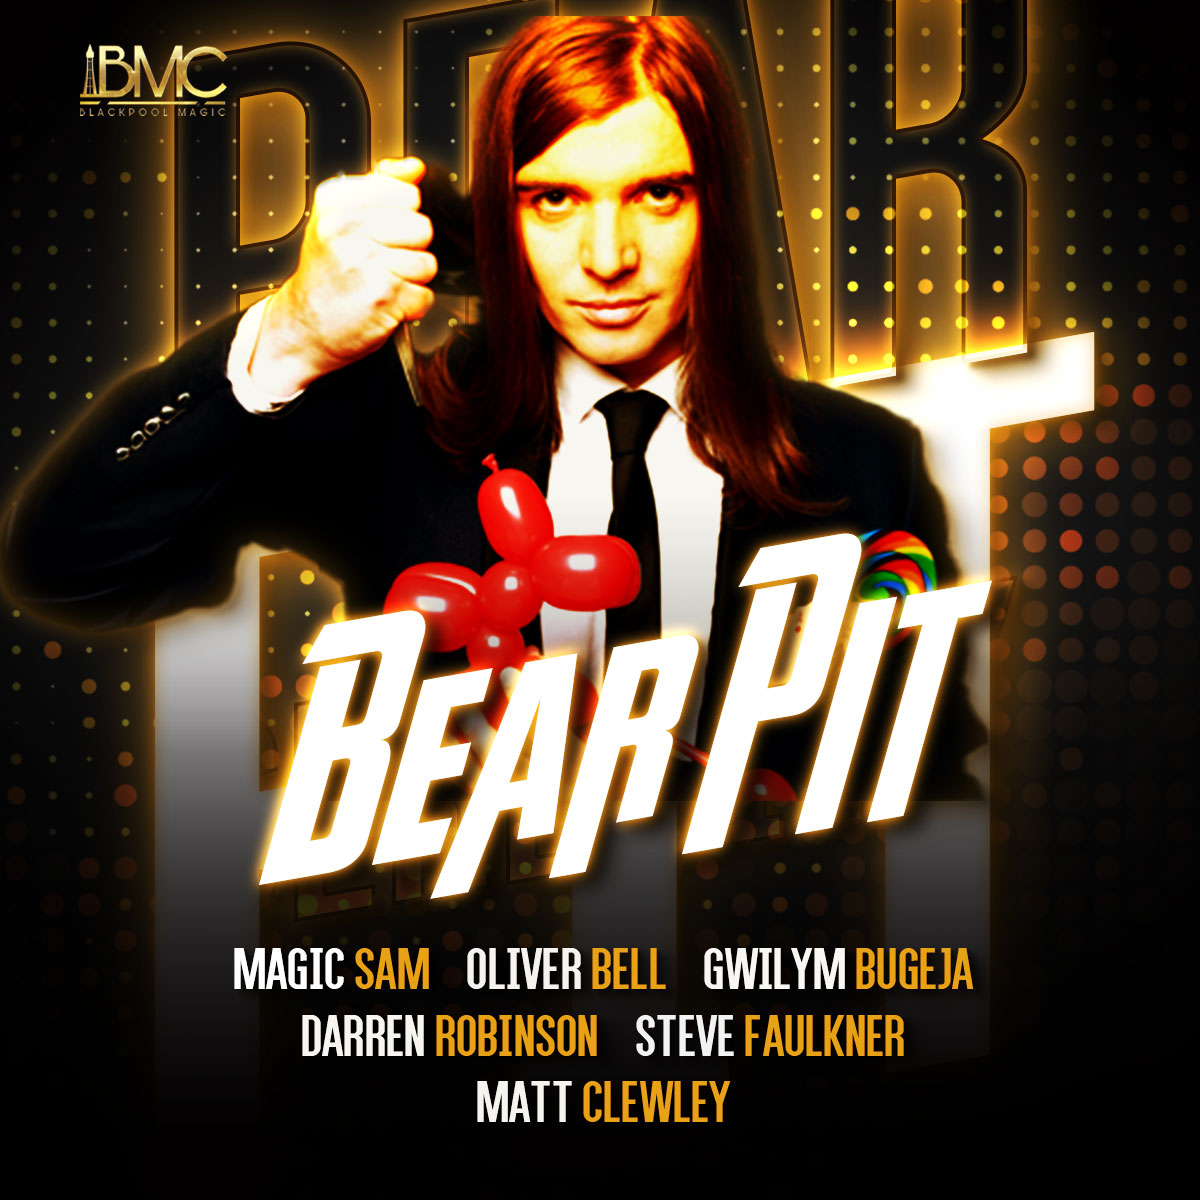 Blackpool Magic Convention Bear Pit Poster